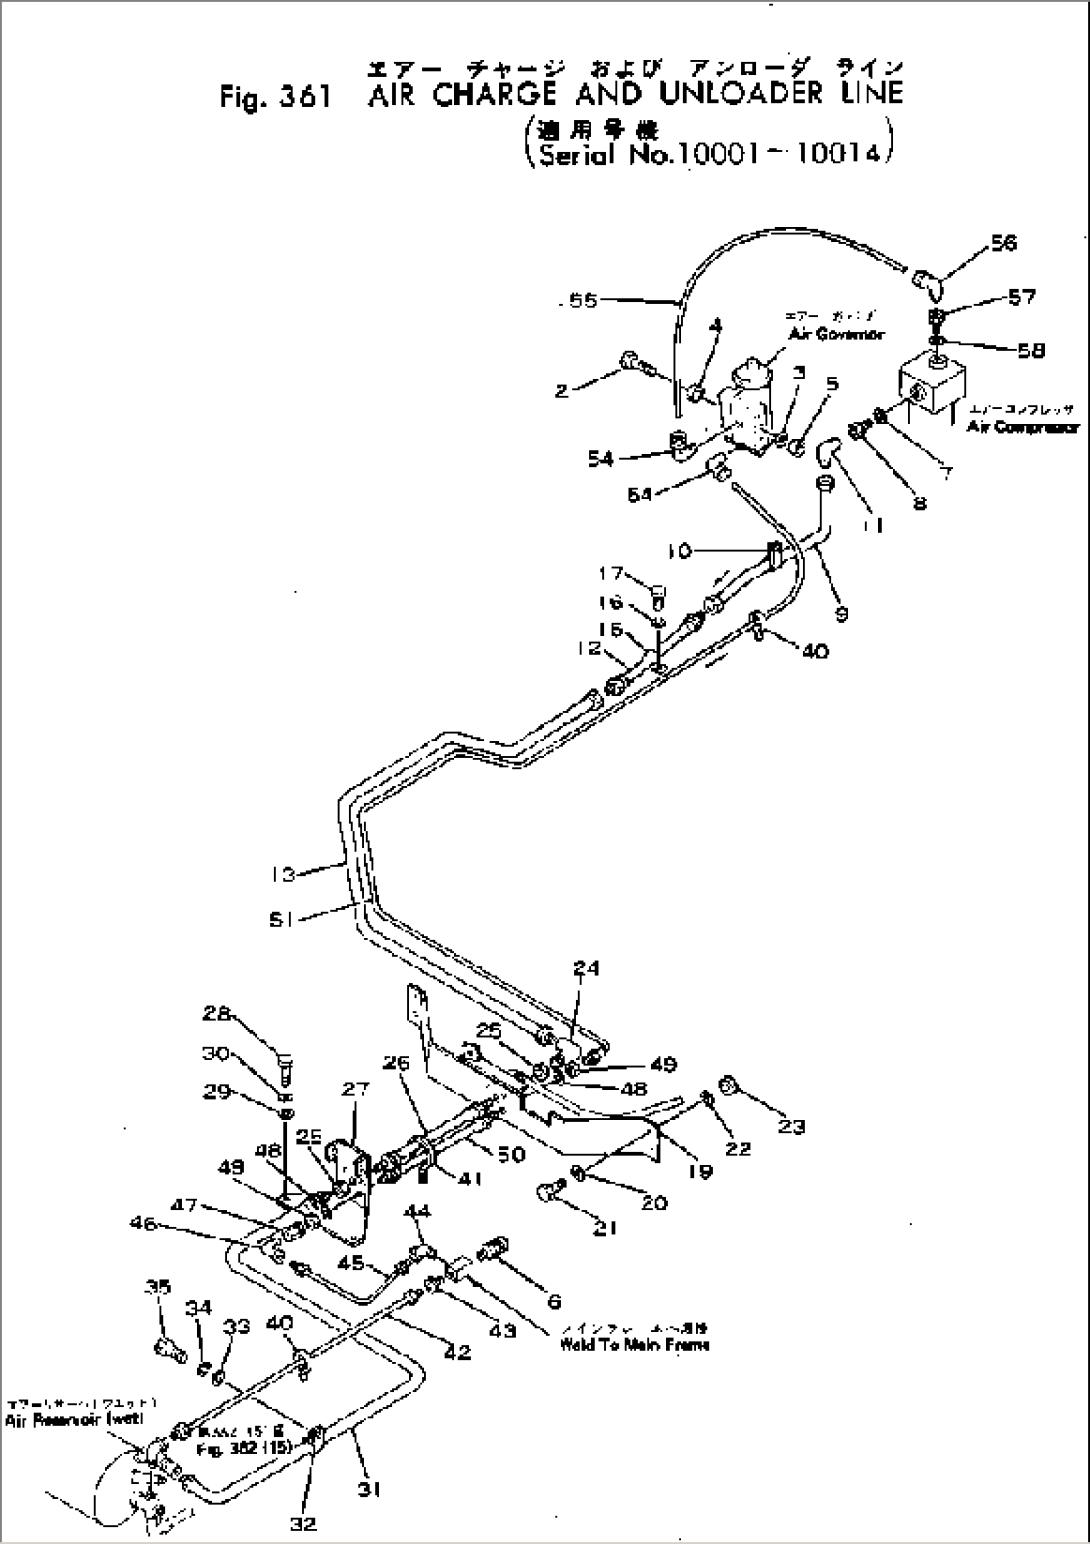 AIR CHARGE AND UNLOADER LINE(#10001-10014)